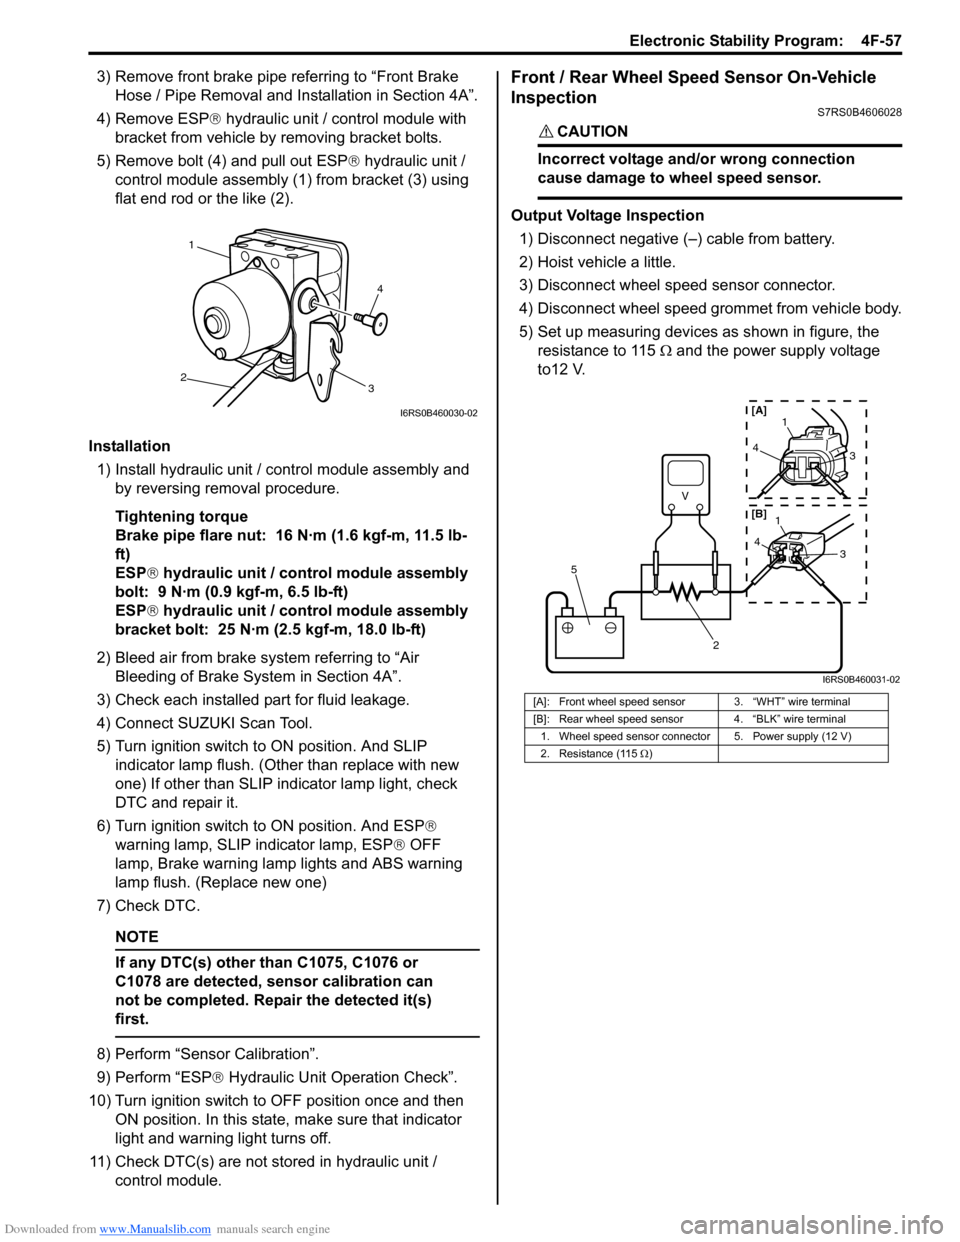 SUZUKI SWIFT 2005 2.G Service Workshop Manual Downloaded from www.Manualslib.com manuals search engine Electronic Stability Program:  4F-57
3) Remove front brake pipe referring to “Front Brake Hose / Pipe Removal and In stallation in Section 4A